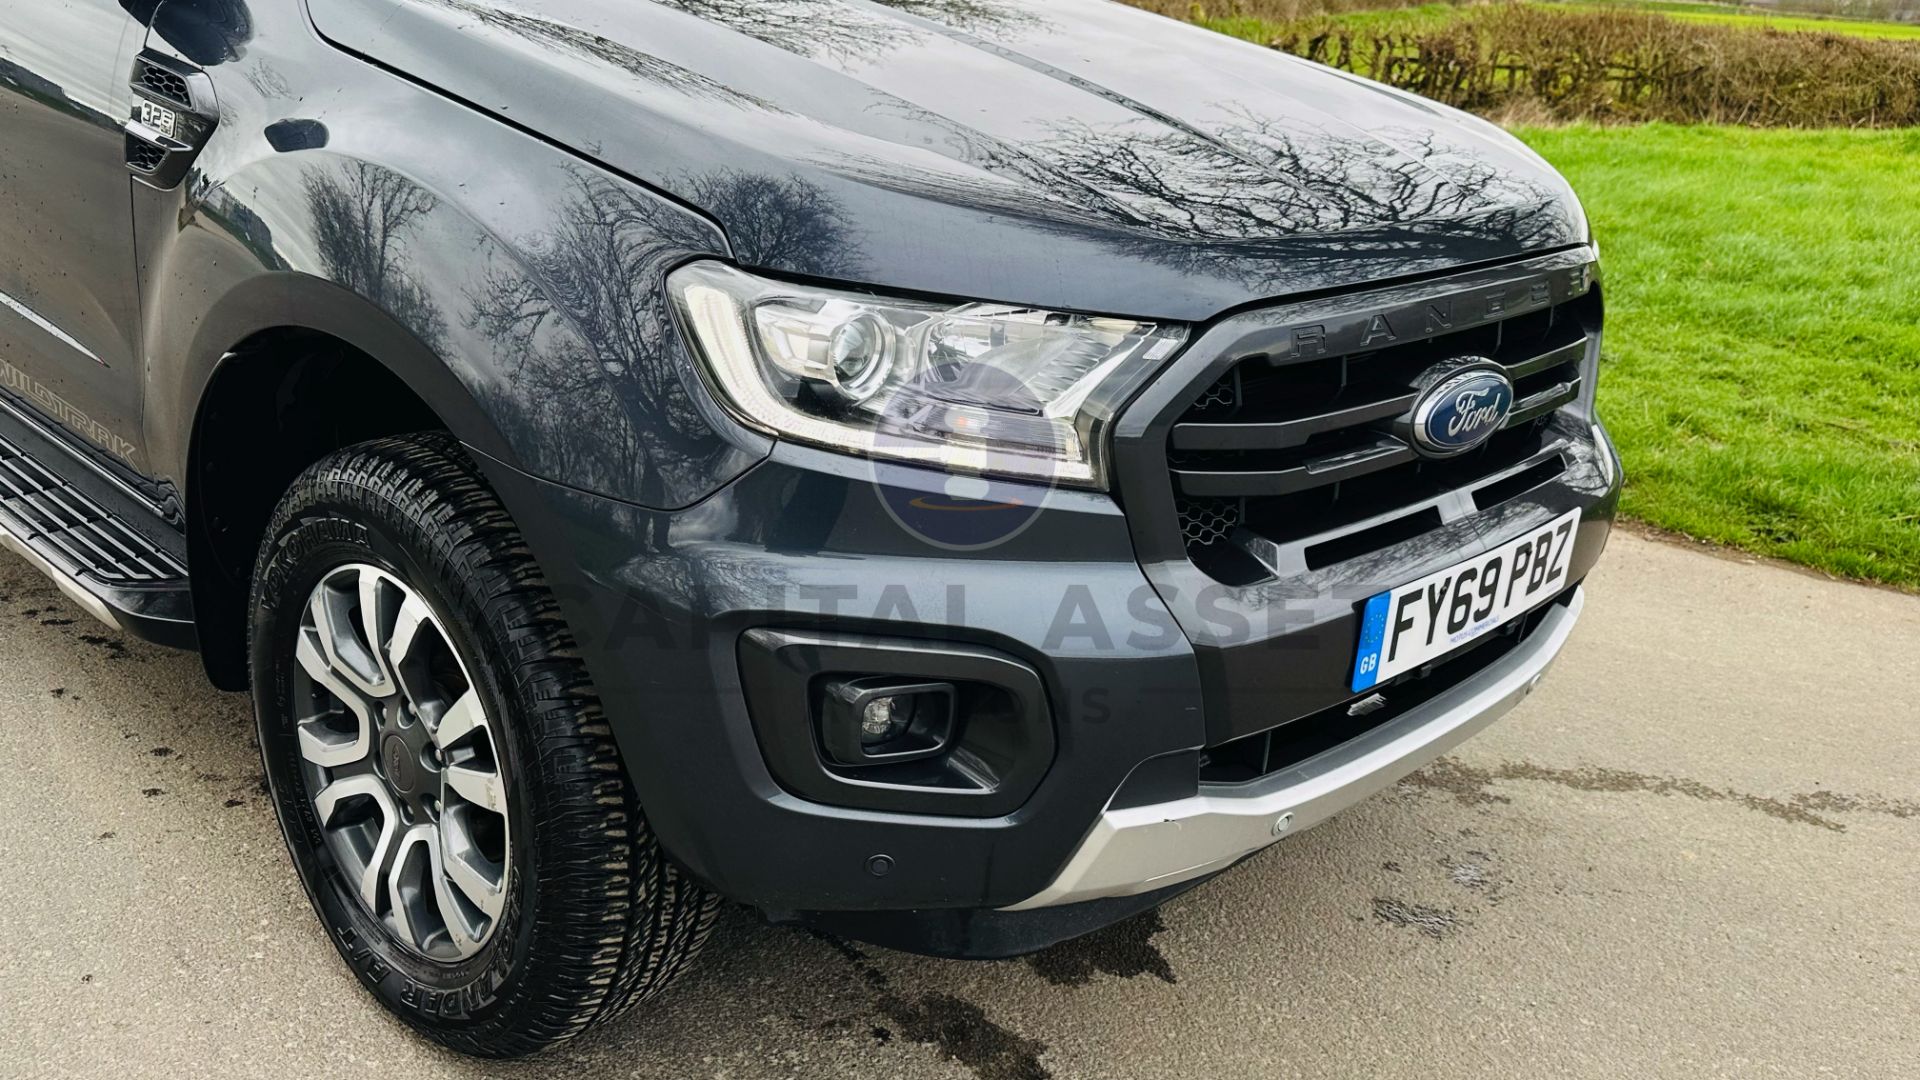 (On Sale) FORD RANGER *WILDTRAK EDITION* DOUBLE CAB PICK-UP (69 REG - EURO 6) 3.2 TDCI - AUTOMATIC - Image 18 of 49